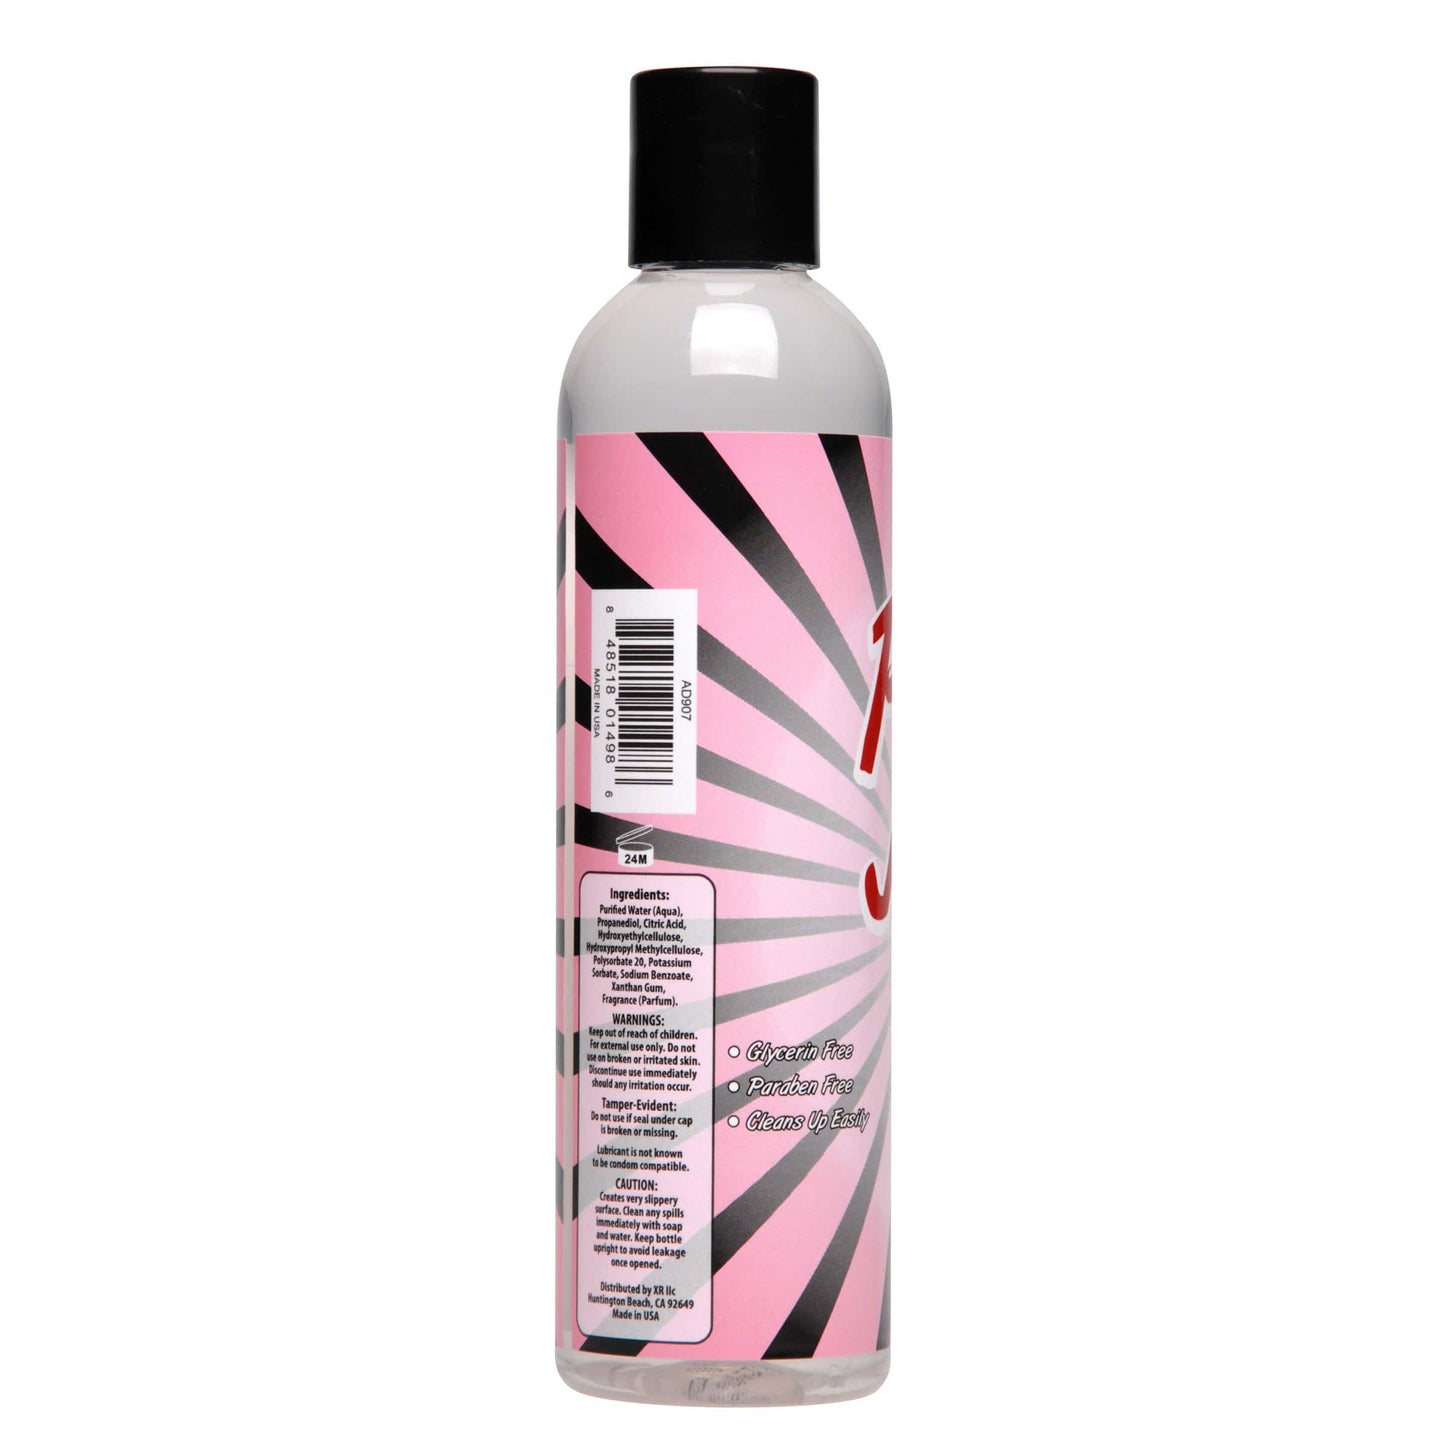 Master Series Water Based Lubricant 8.25 oz. Pussy Juice Vagina Scented Lube at the Haus of Shag